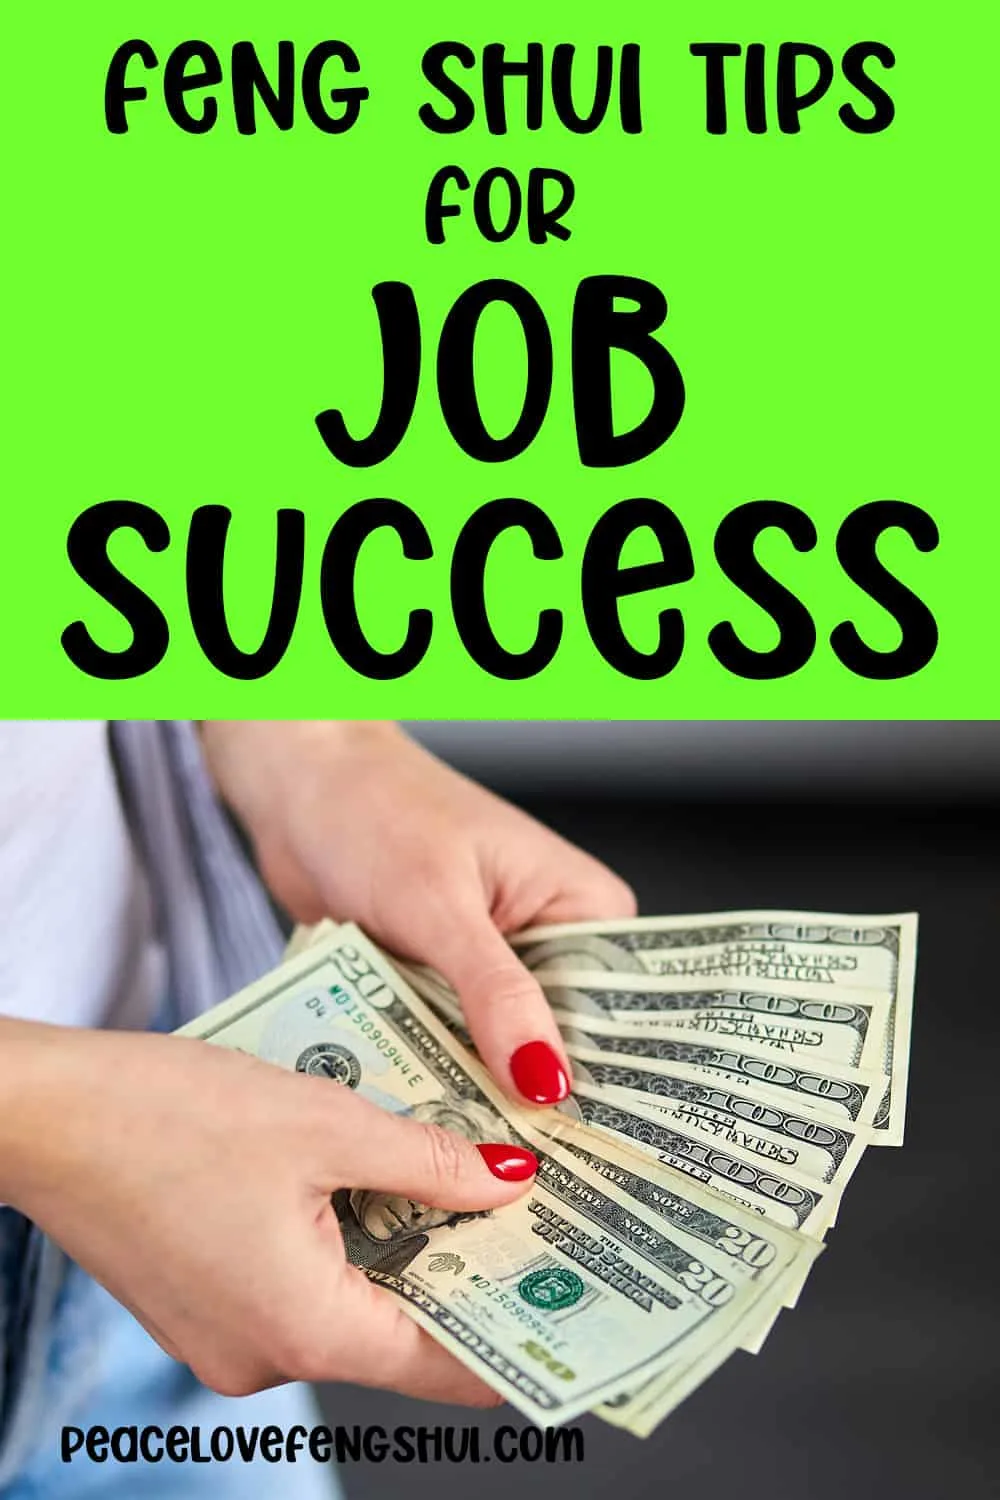 feng shui tips for job success (woman's hands holding cash)